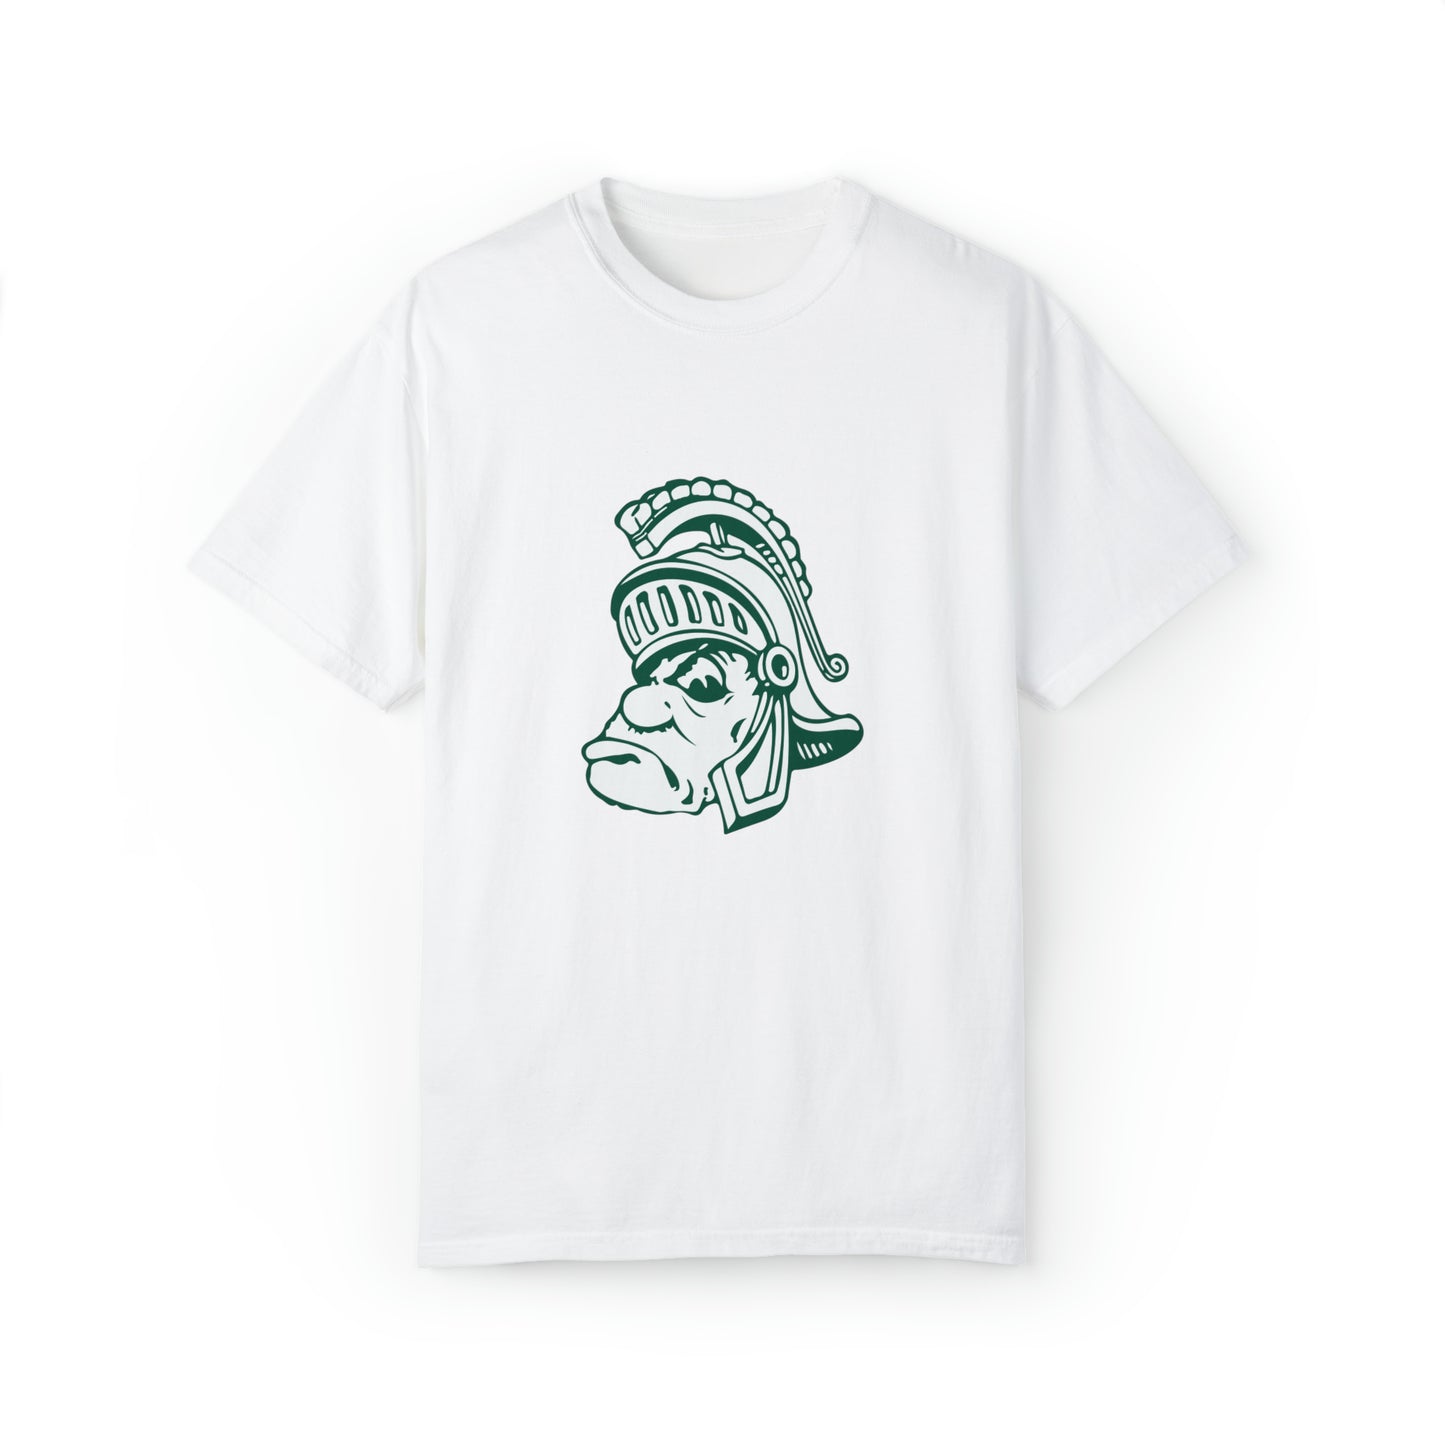 Gruff Sparty T-shirt